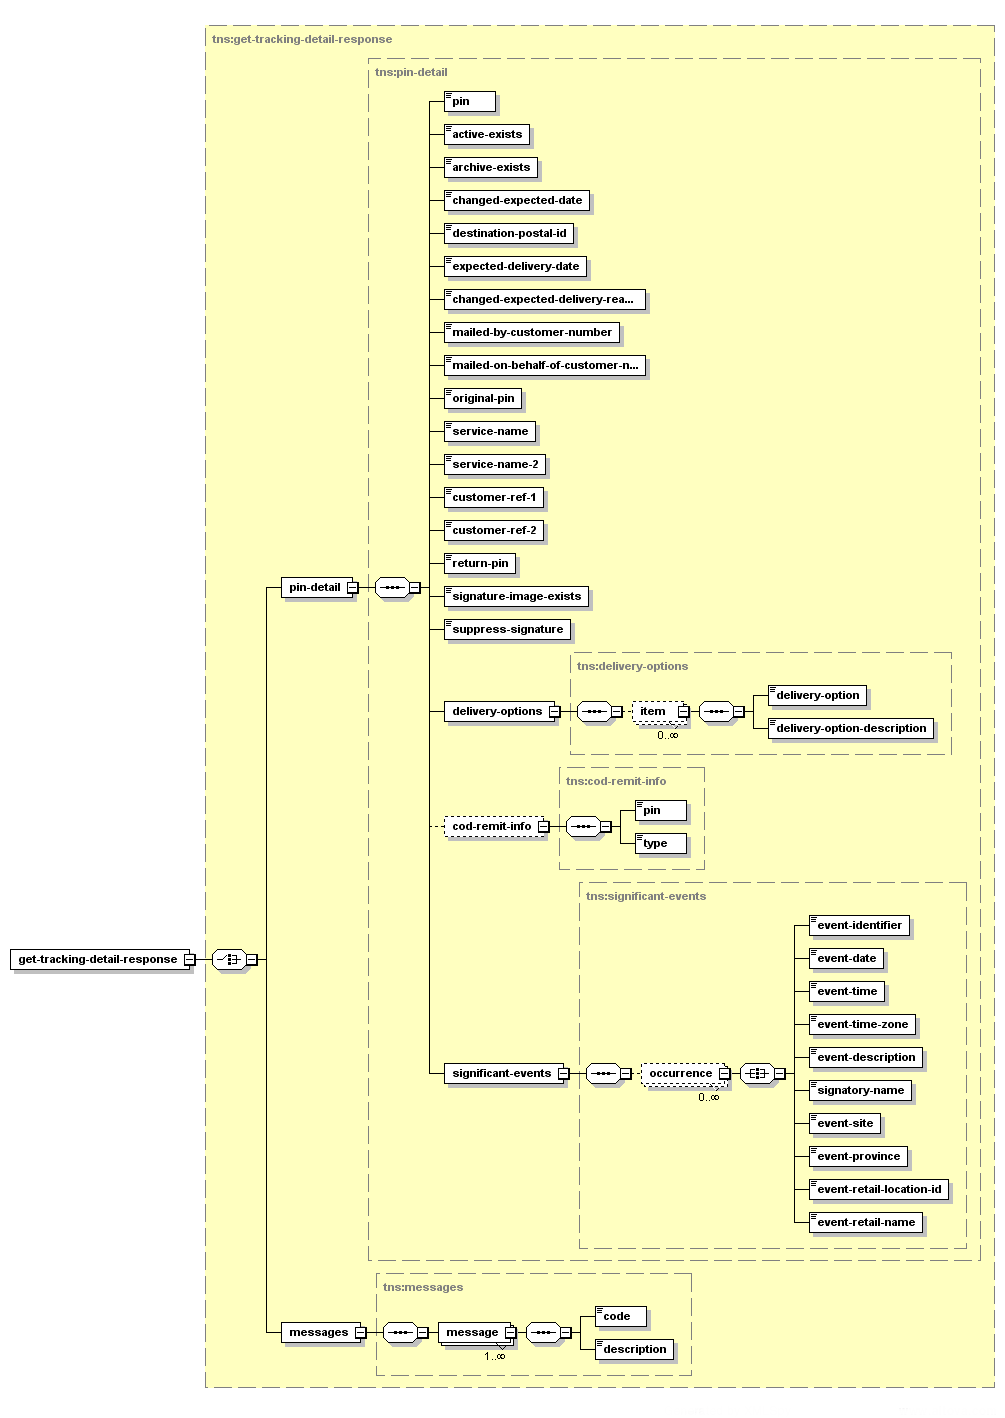 Get Tracking Details – Structure of the XML Response